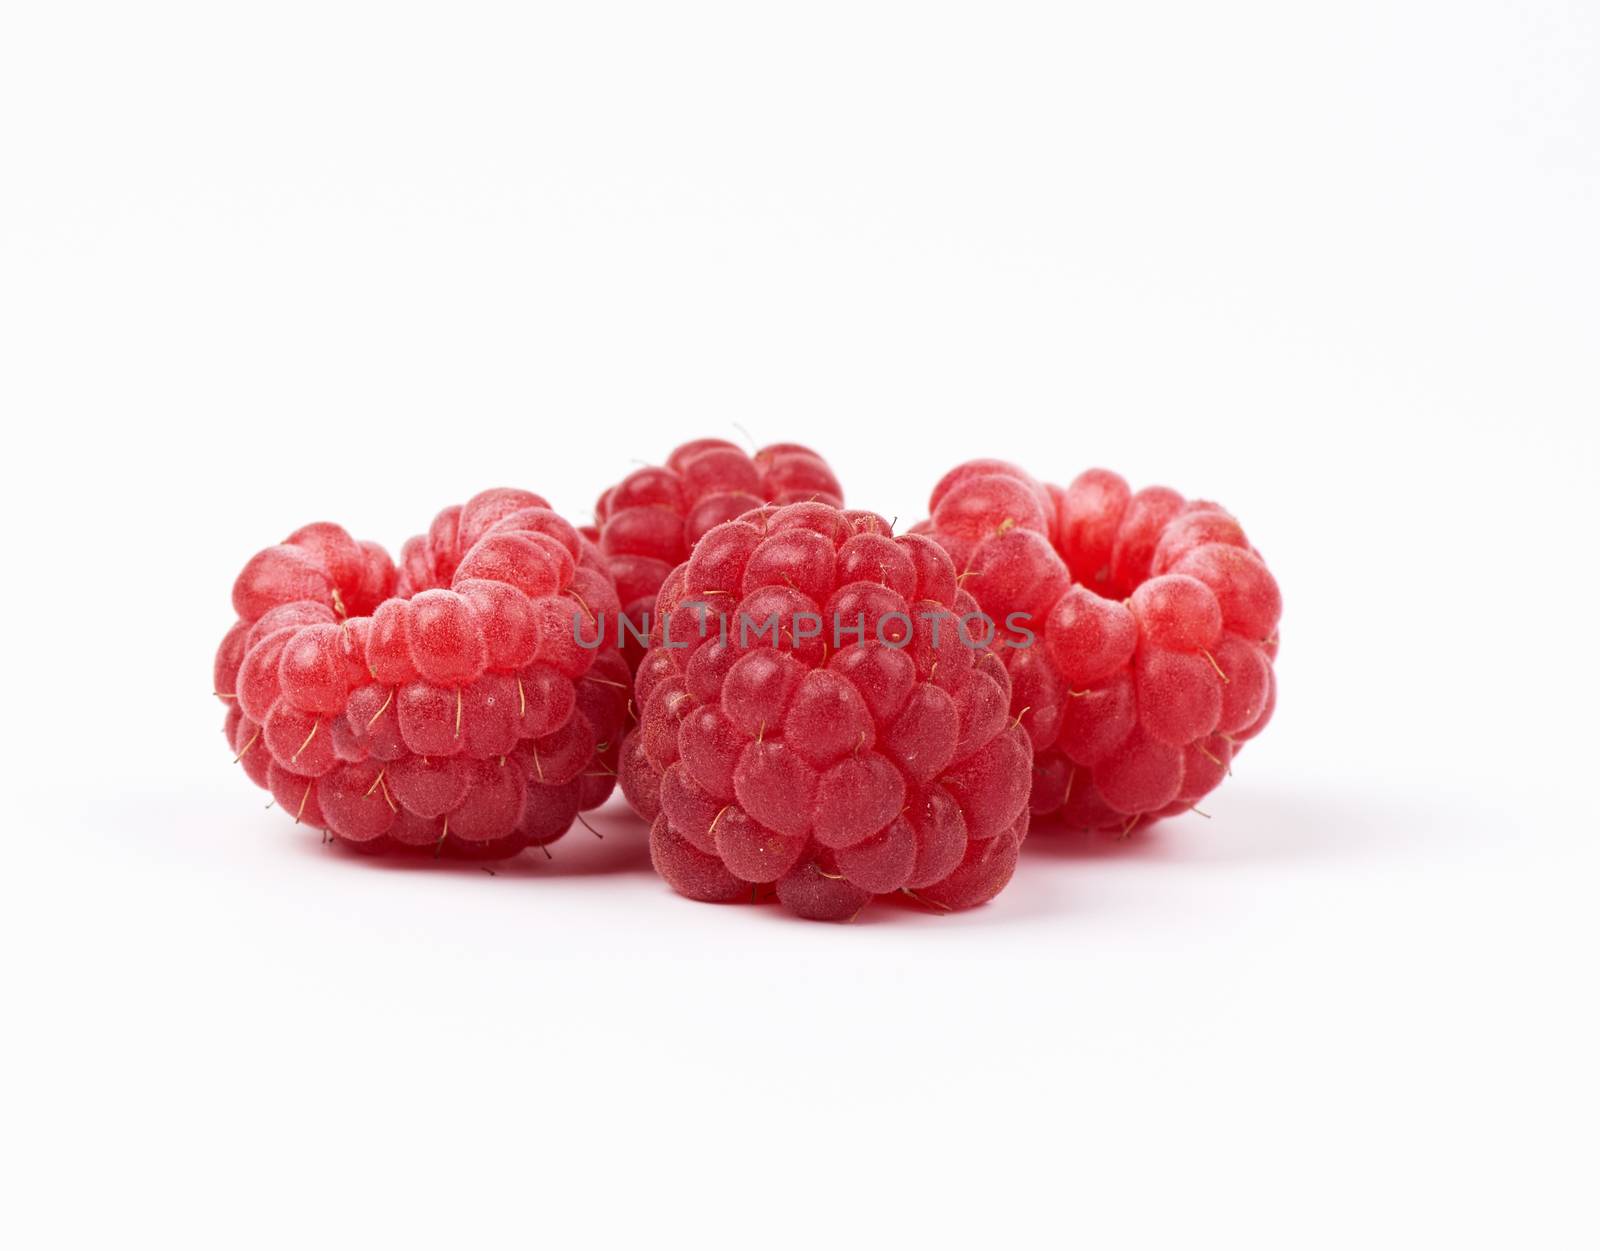 whole ripe red raspberries on a white background by ndanko